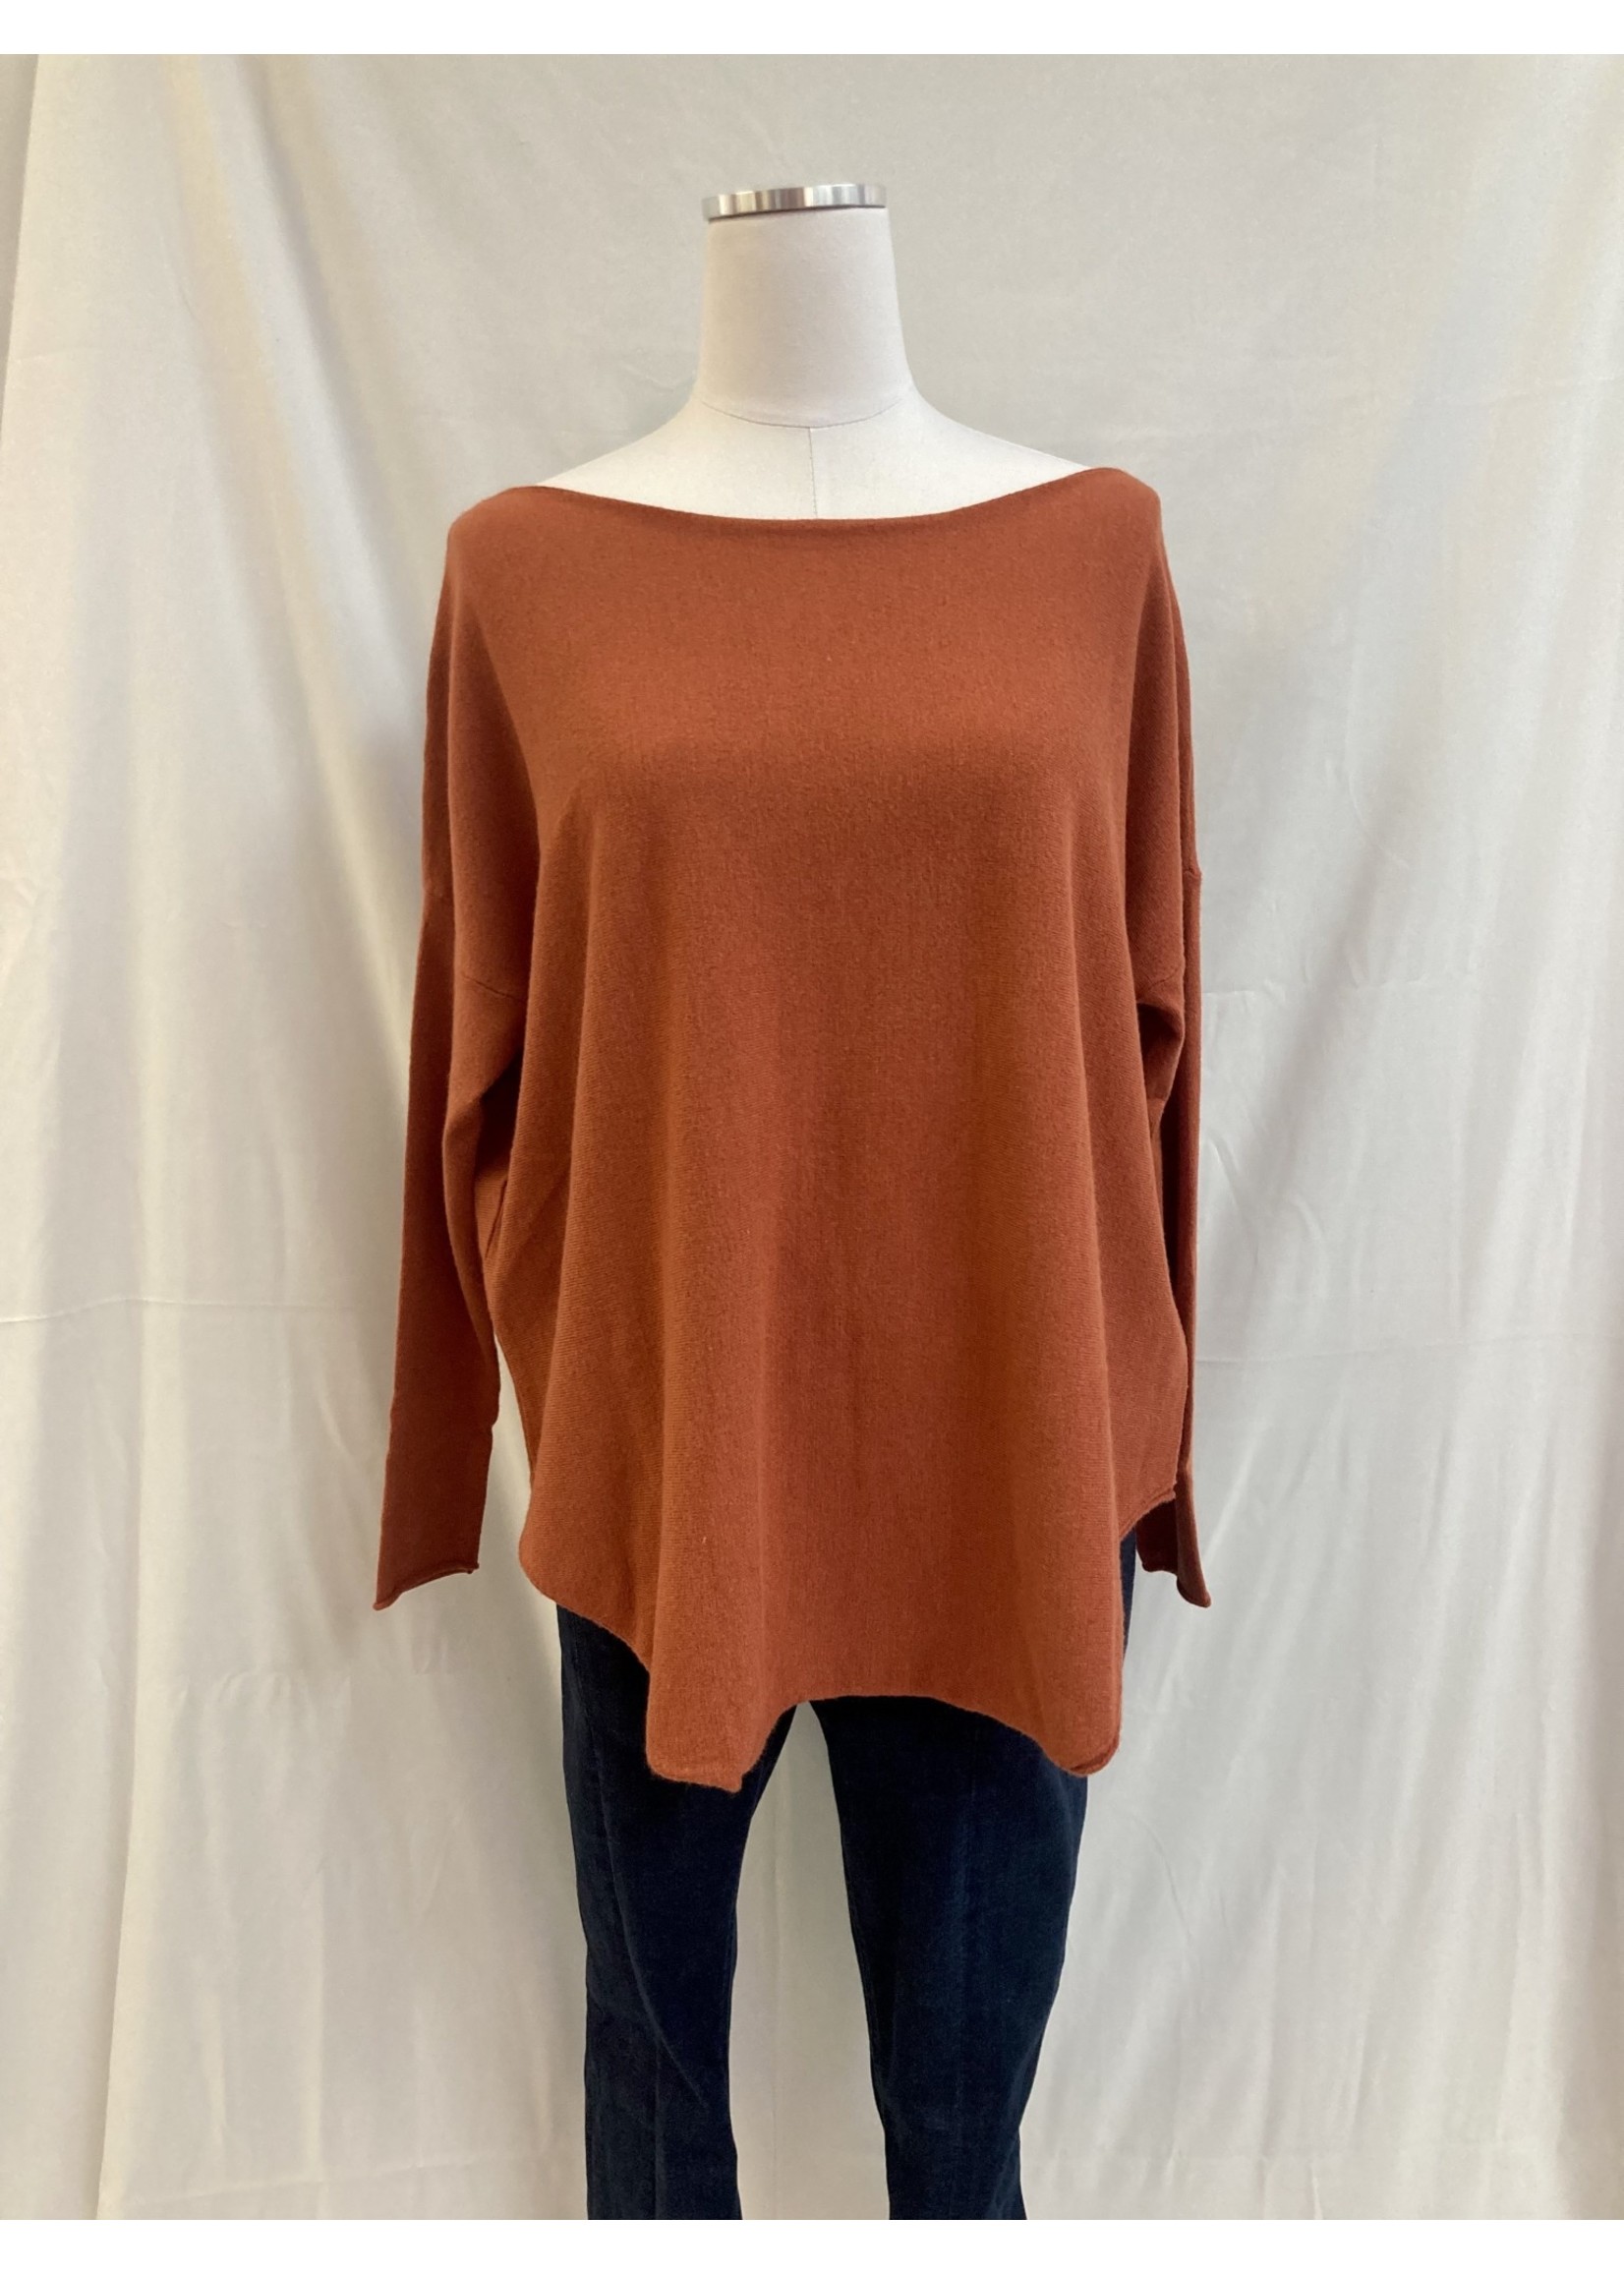 Made In Italy Orange Knit Top